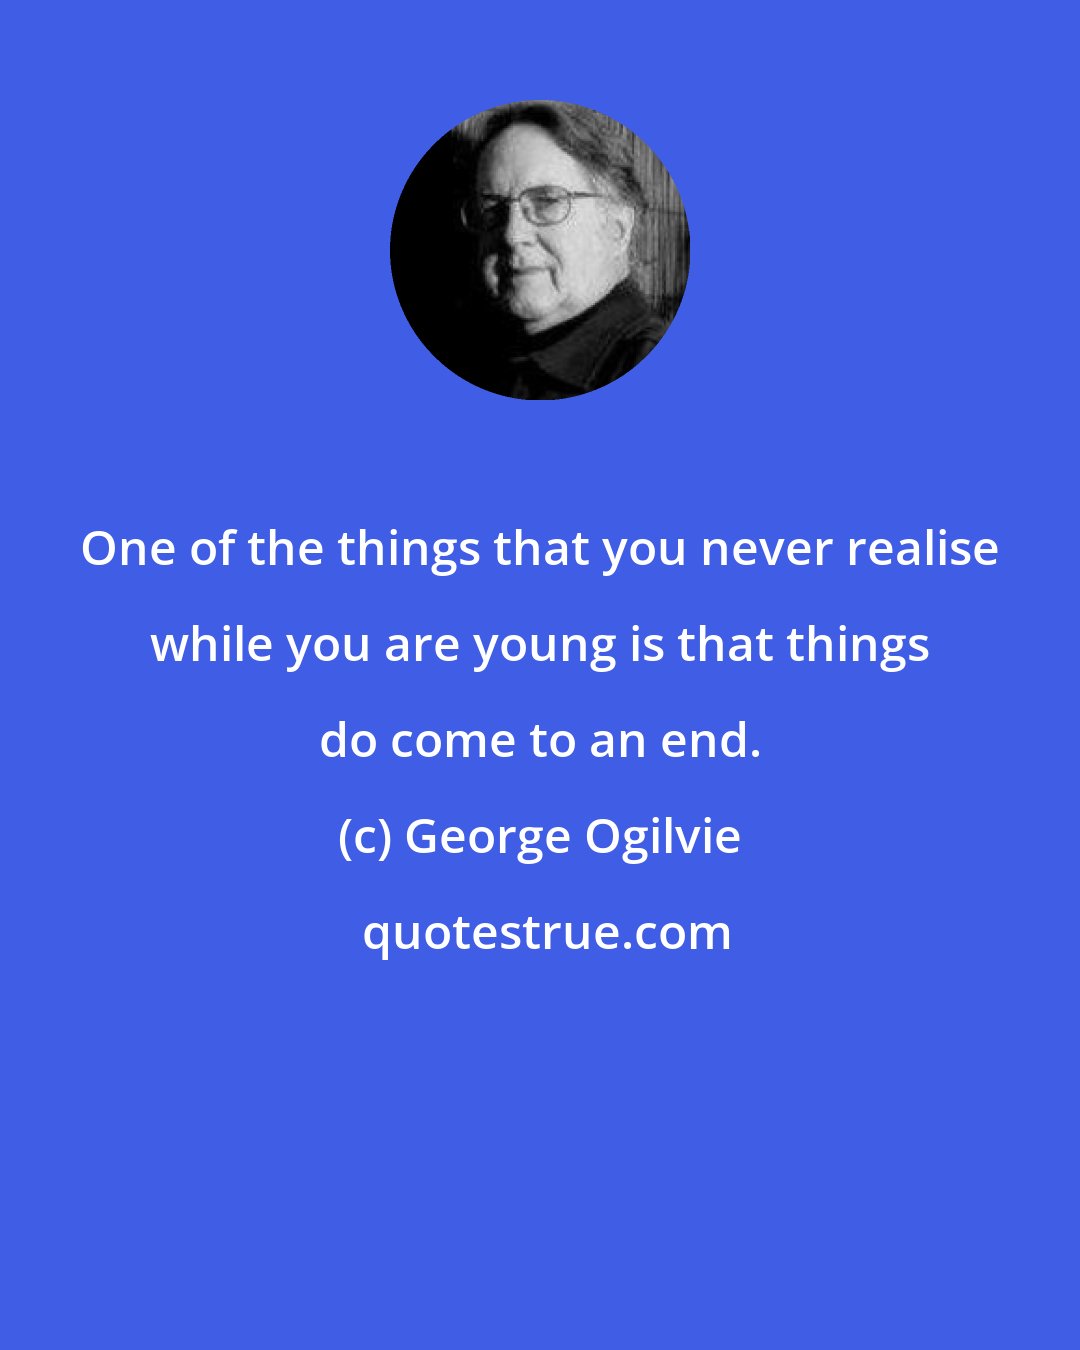 George Ogilvie: One of the things that you never realise while you are young is that things do come to an end.